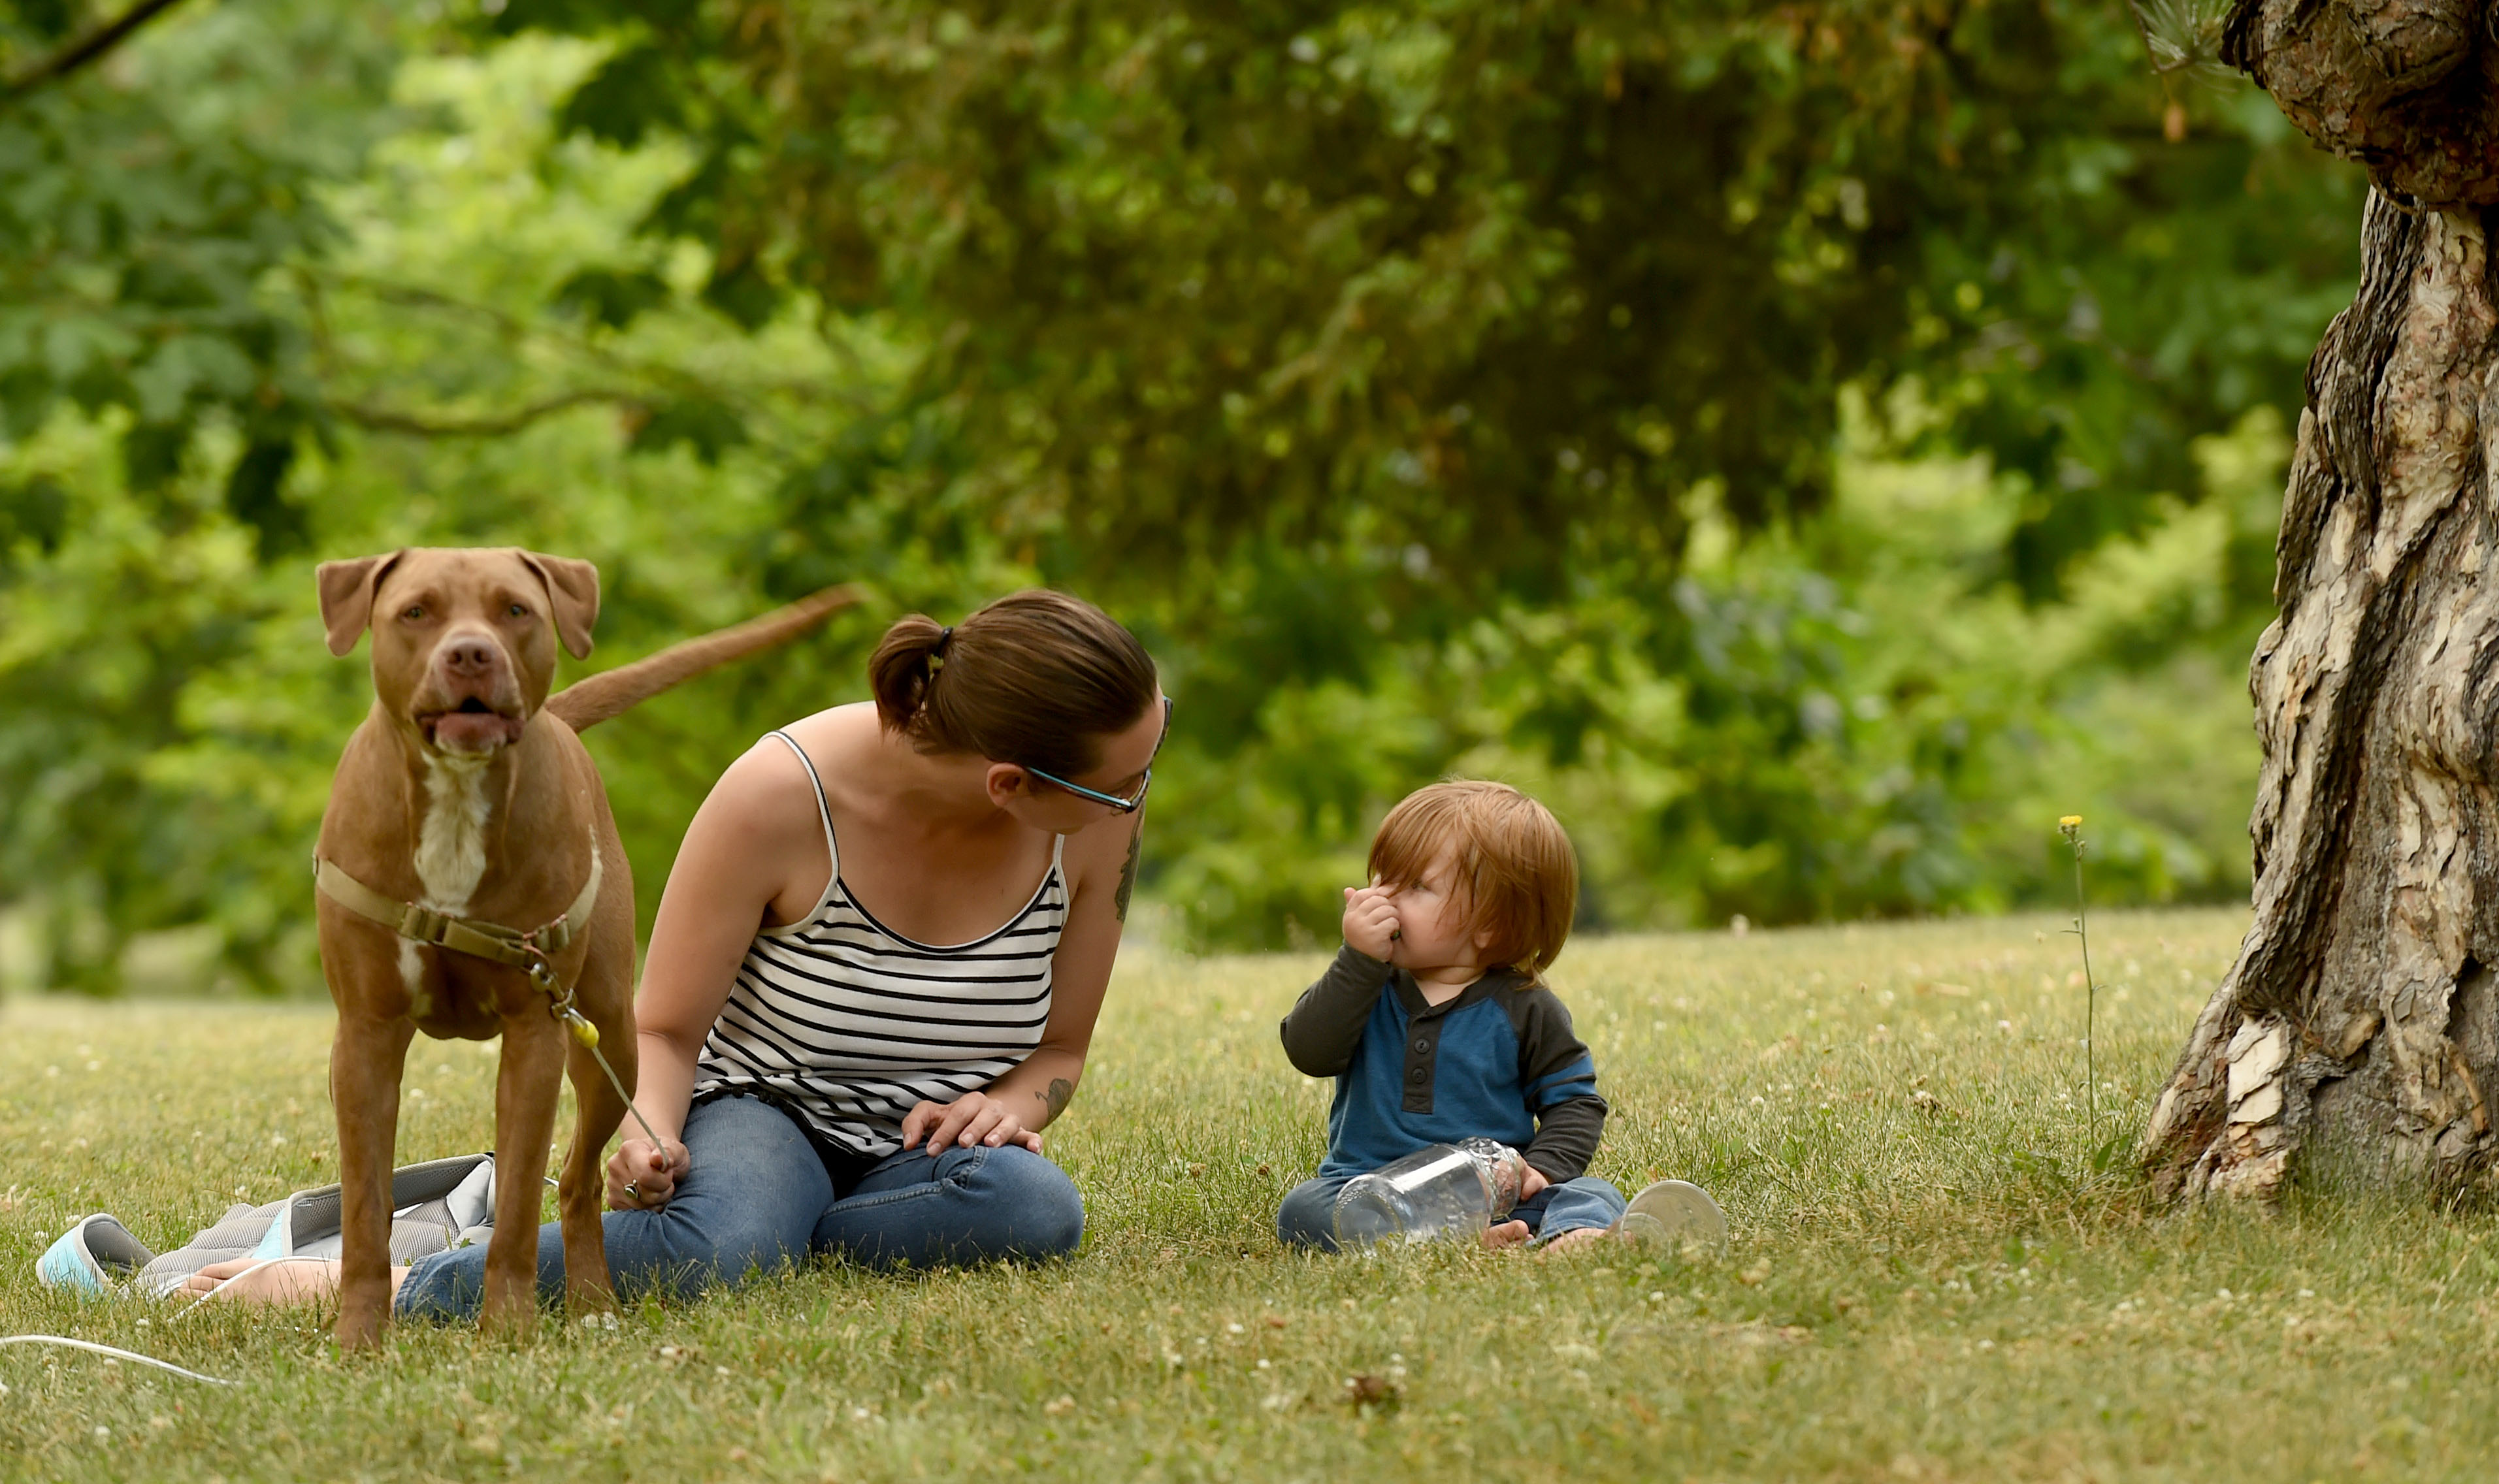 People are still looking for a way to cool down during a heat spell in Syracuse, July 8, 2020.  Rachel and her son Jesse Currier find some shade in Onondaga Park with dog Rambo. Dennis Nett | dnett@syracuse.com